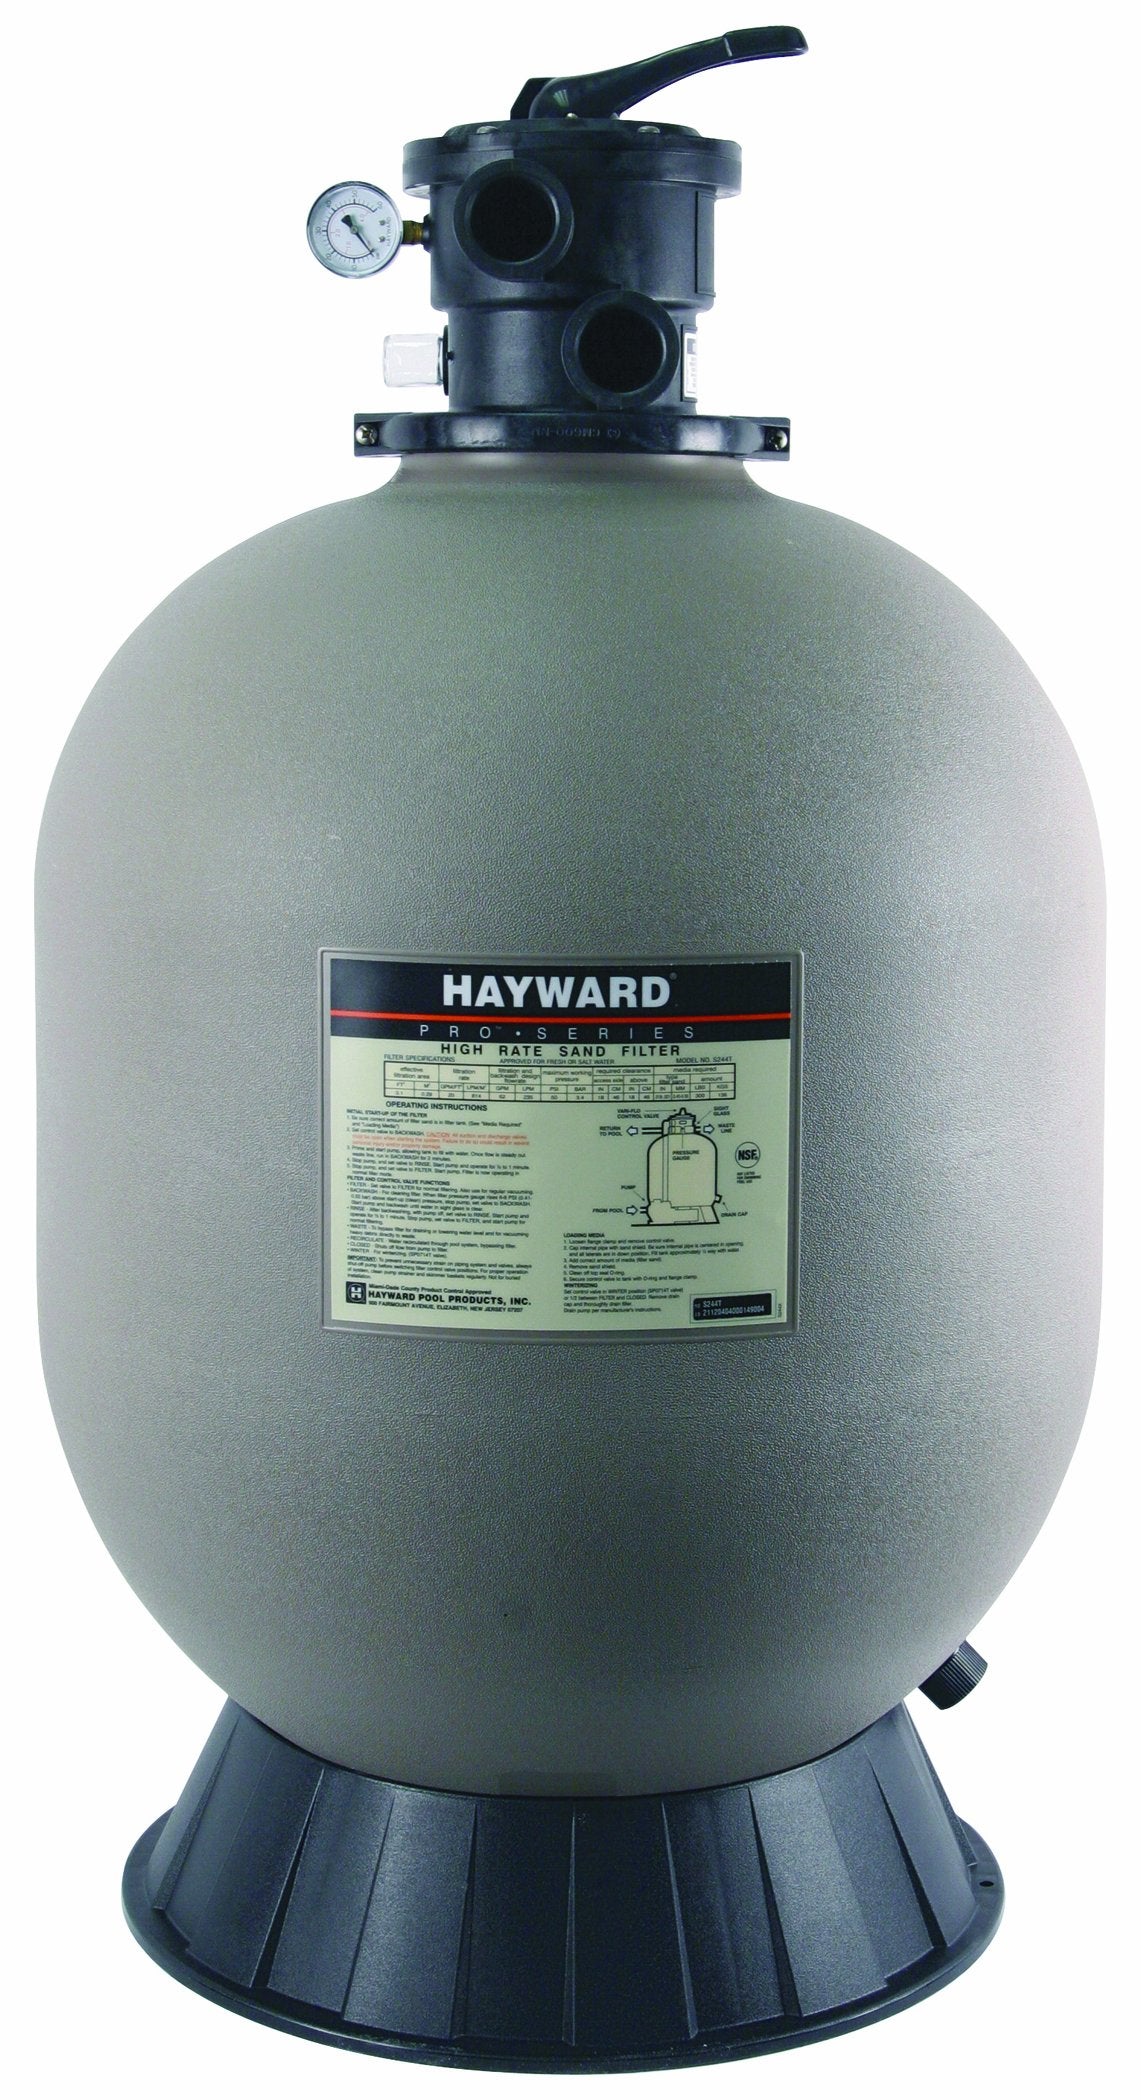 Hayward S244T ProSeries Sand Filter, 24-Inch, Top-Mount 1.5 Inch Valve